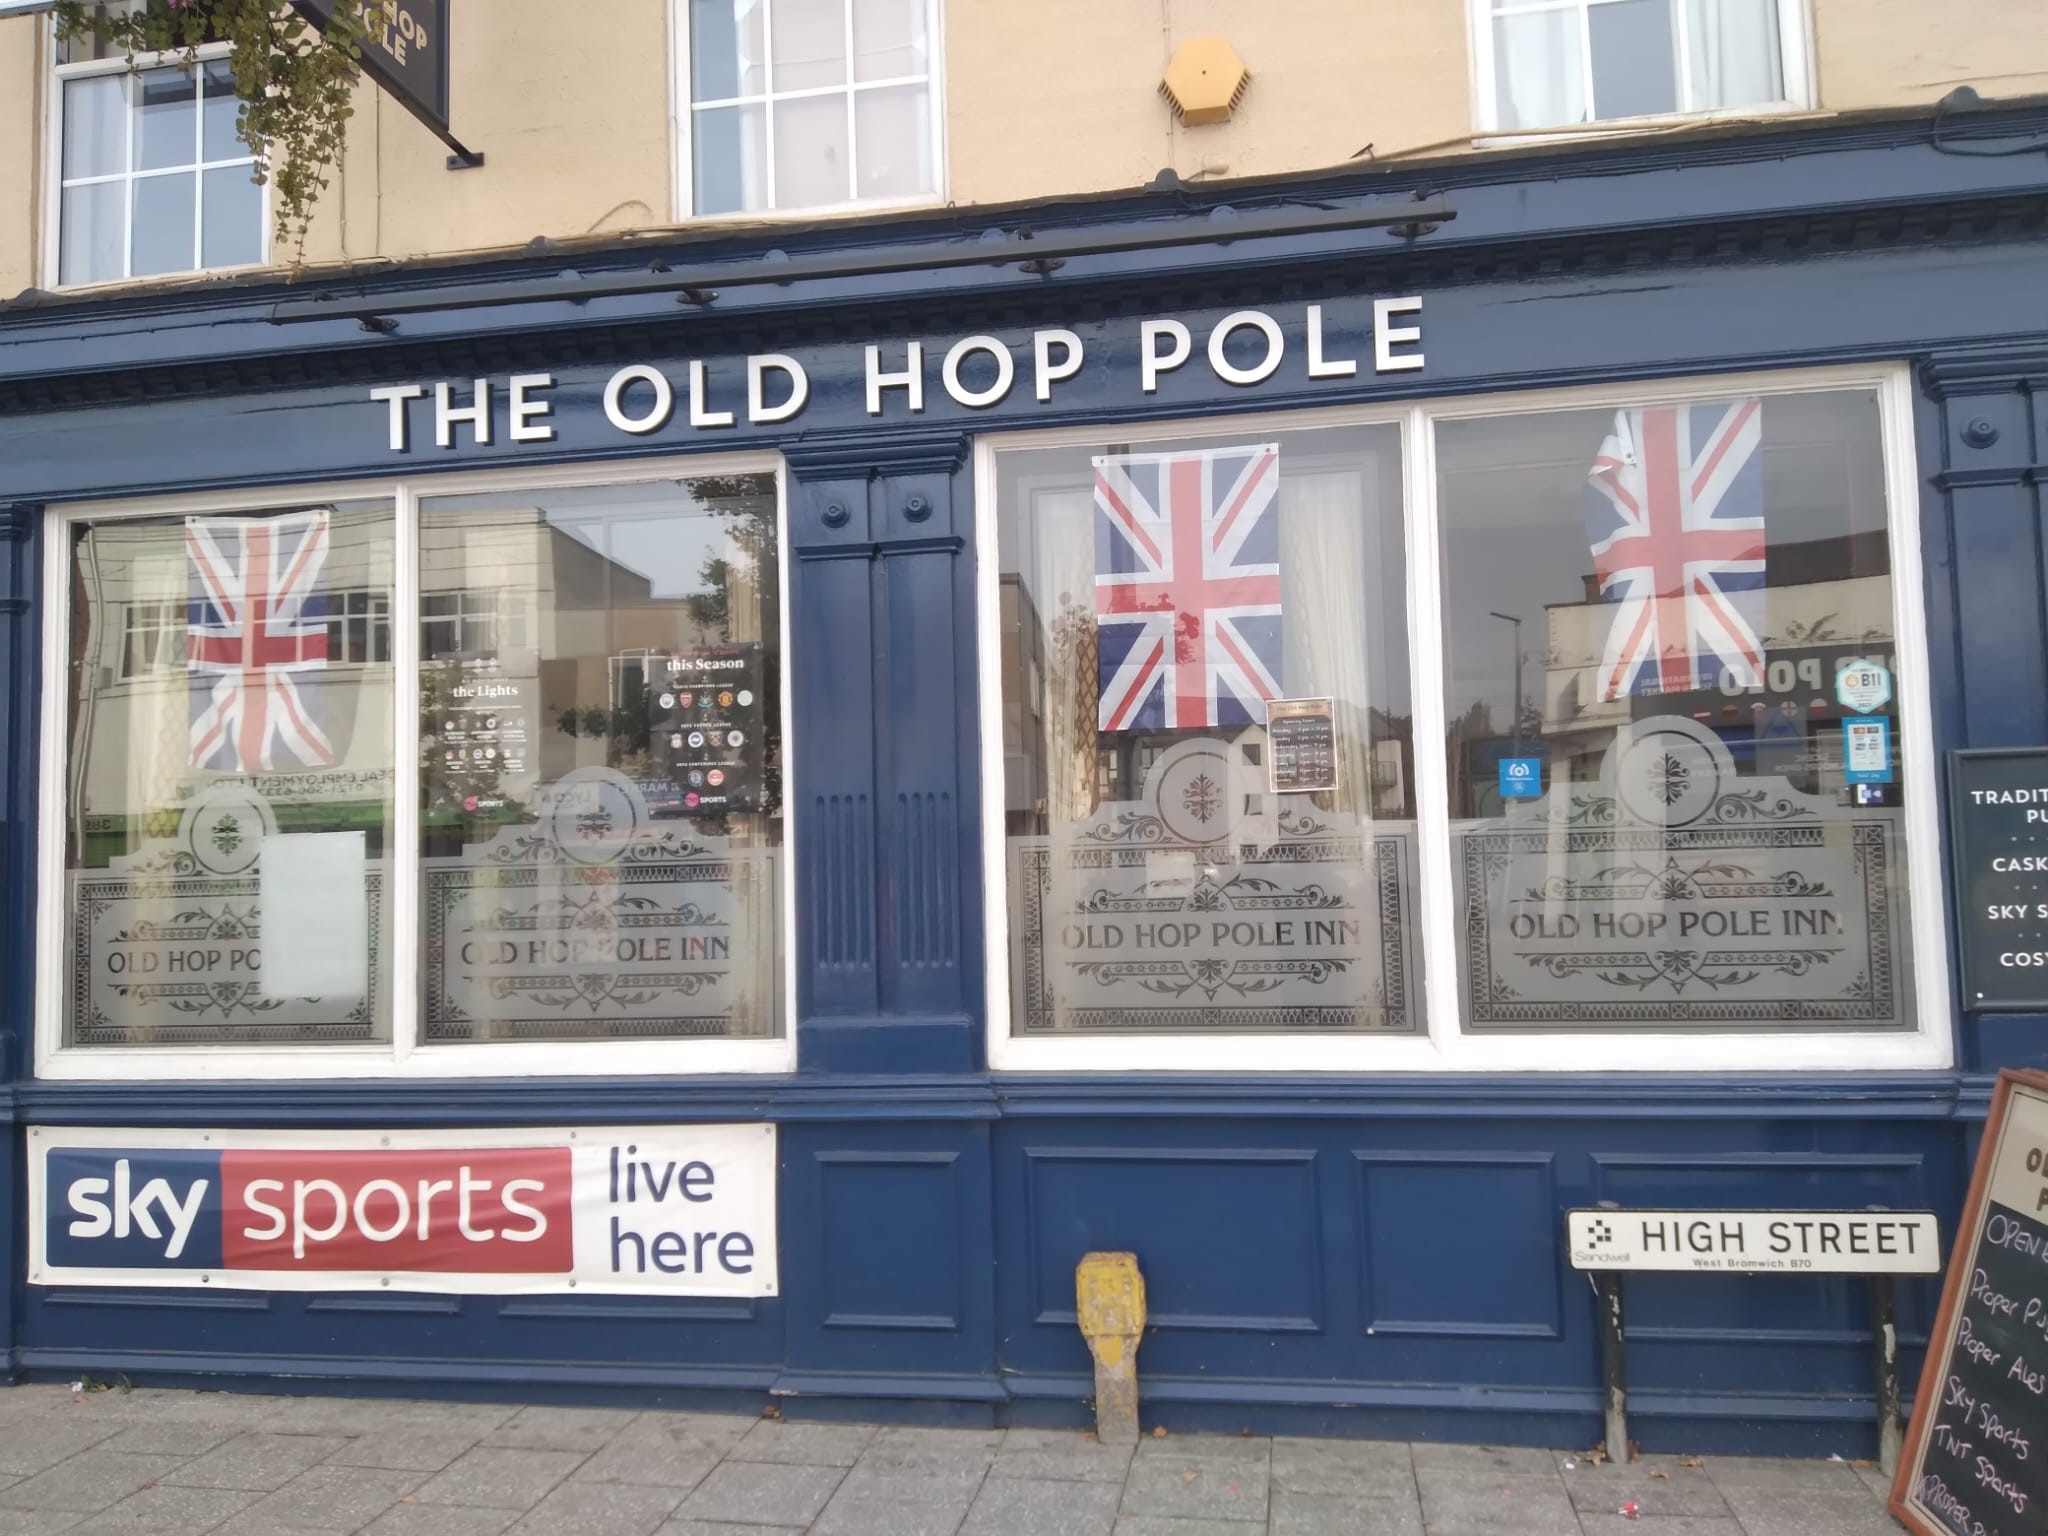 Come down and enjoy a cold beer at The Old Hop Pole